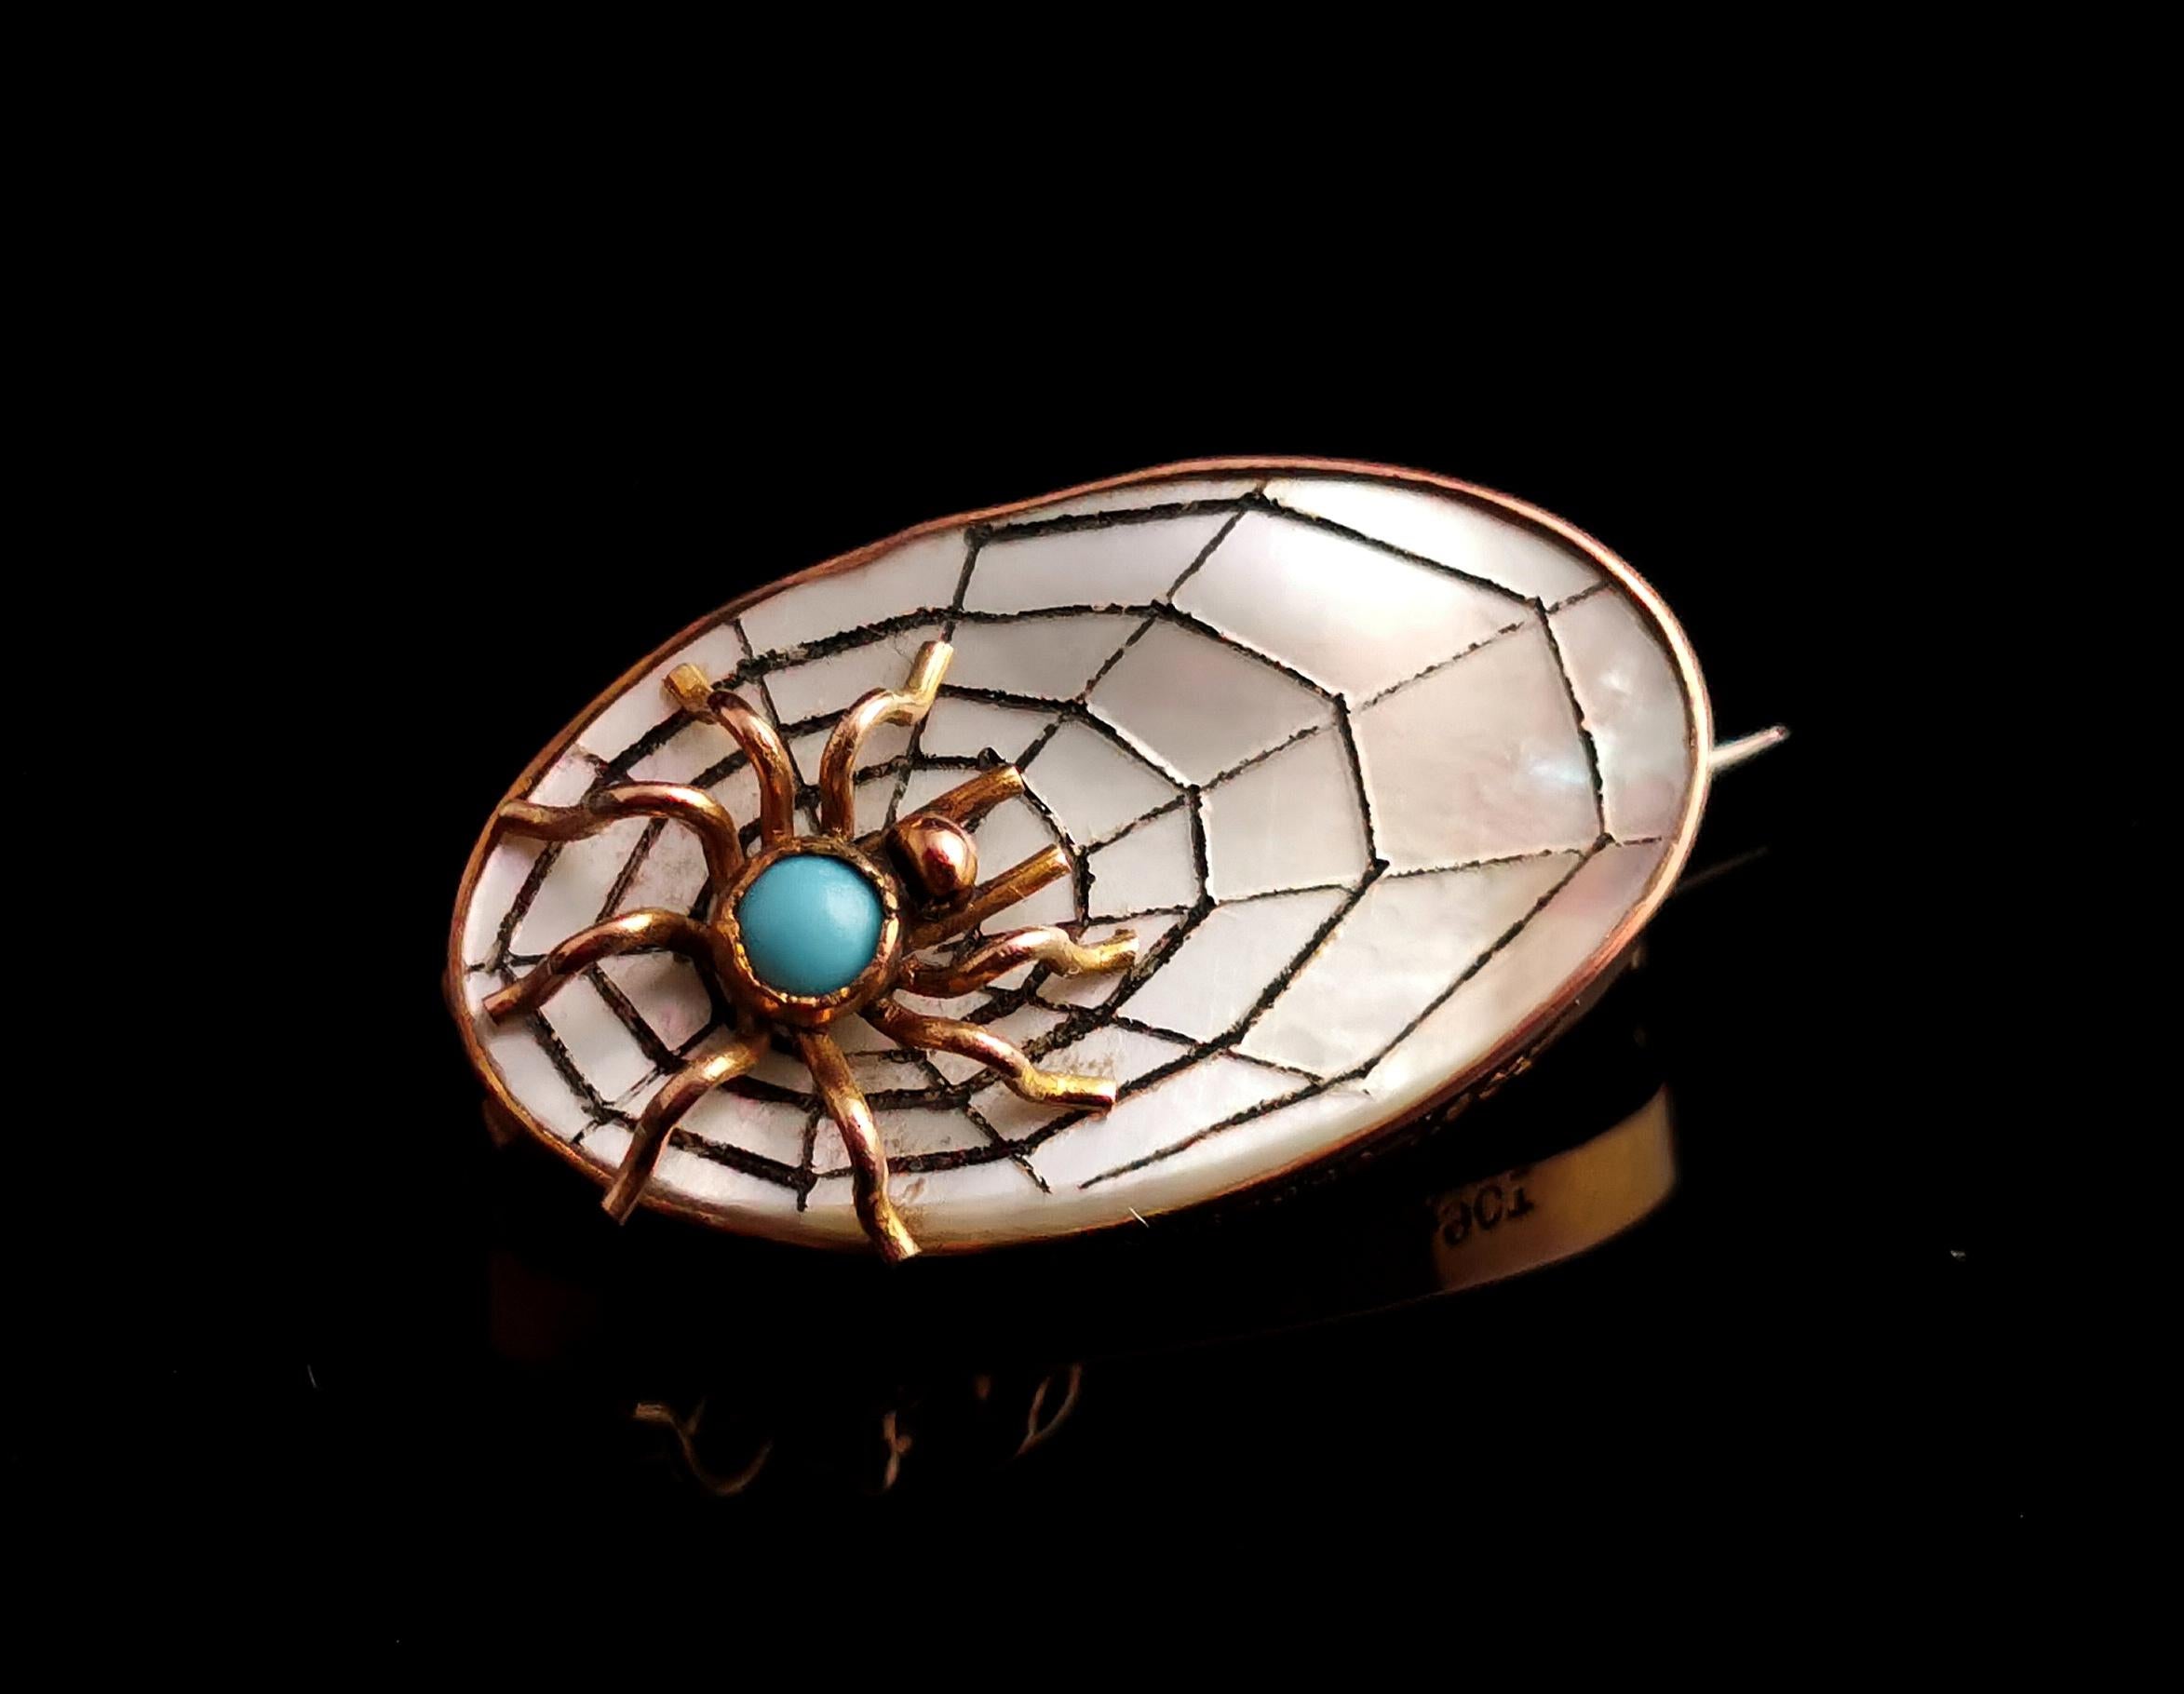 Antique Spider and Web Brooch, 9k Gold, Mother of Pearl 1